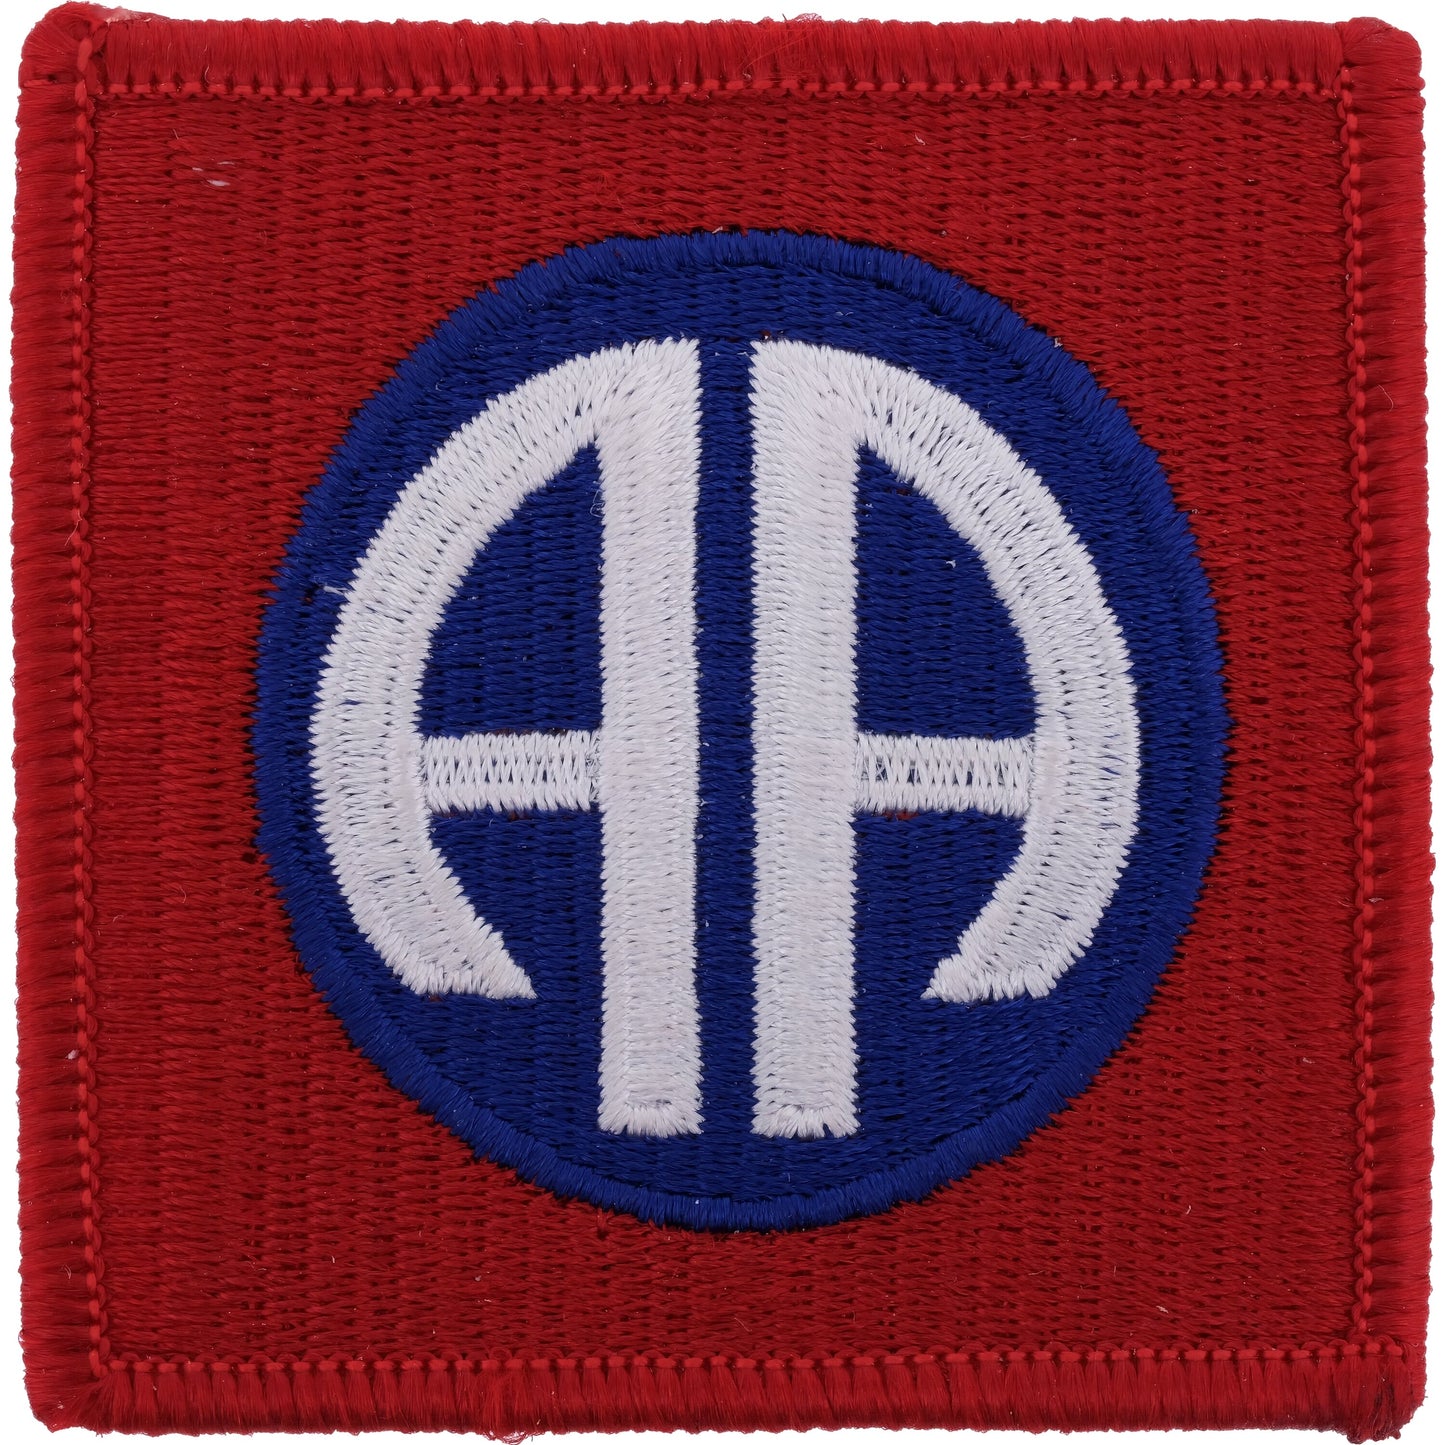 U.S Army 82nd Airborne Division Class A Patch 2"